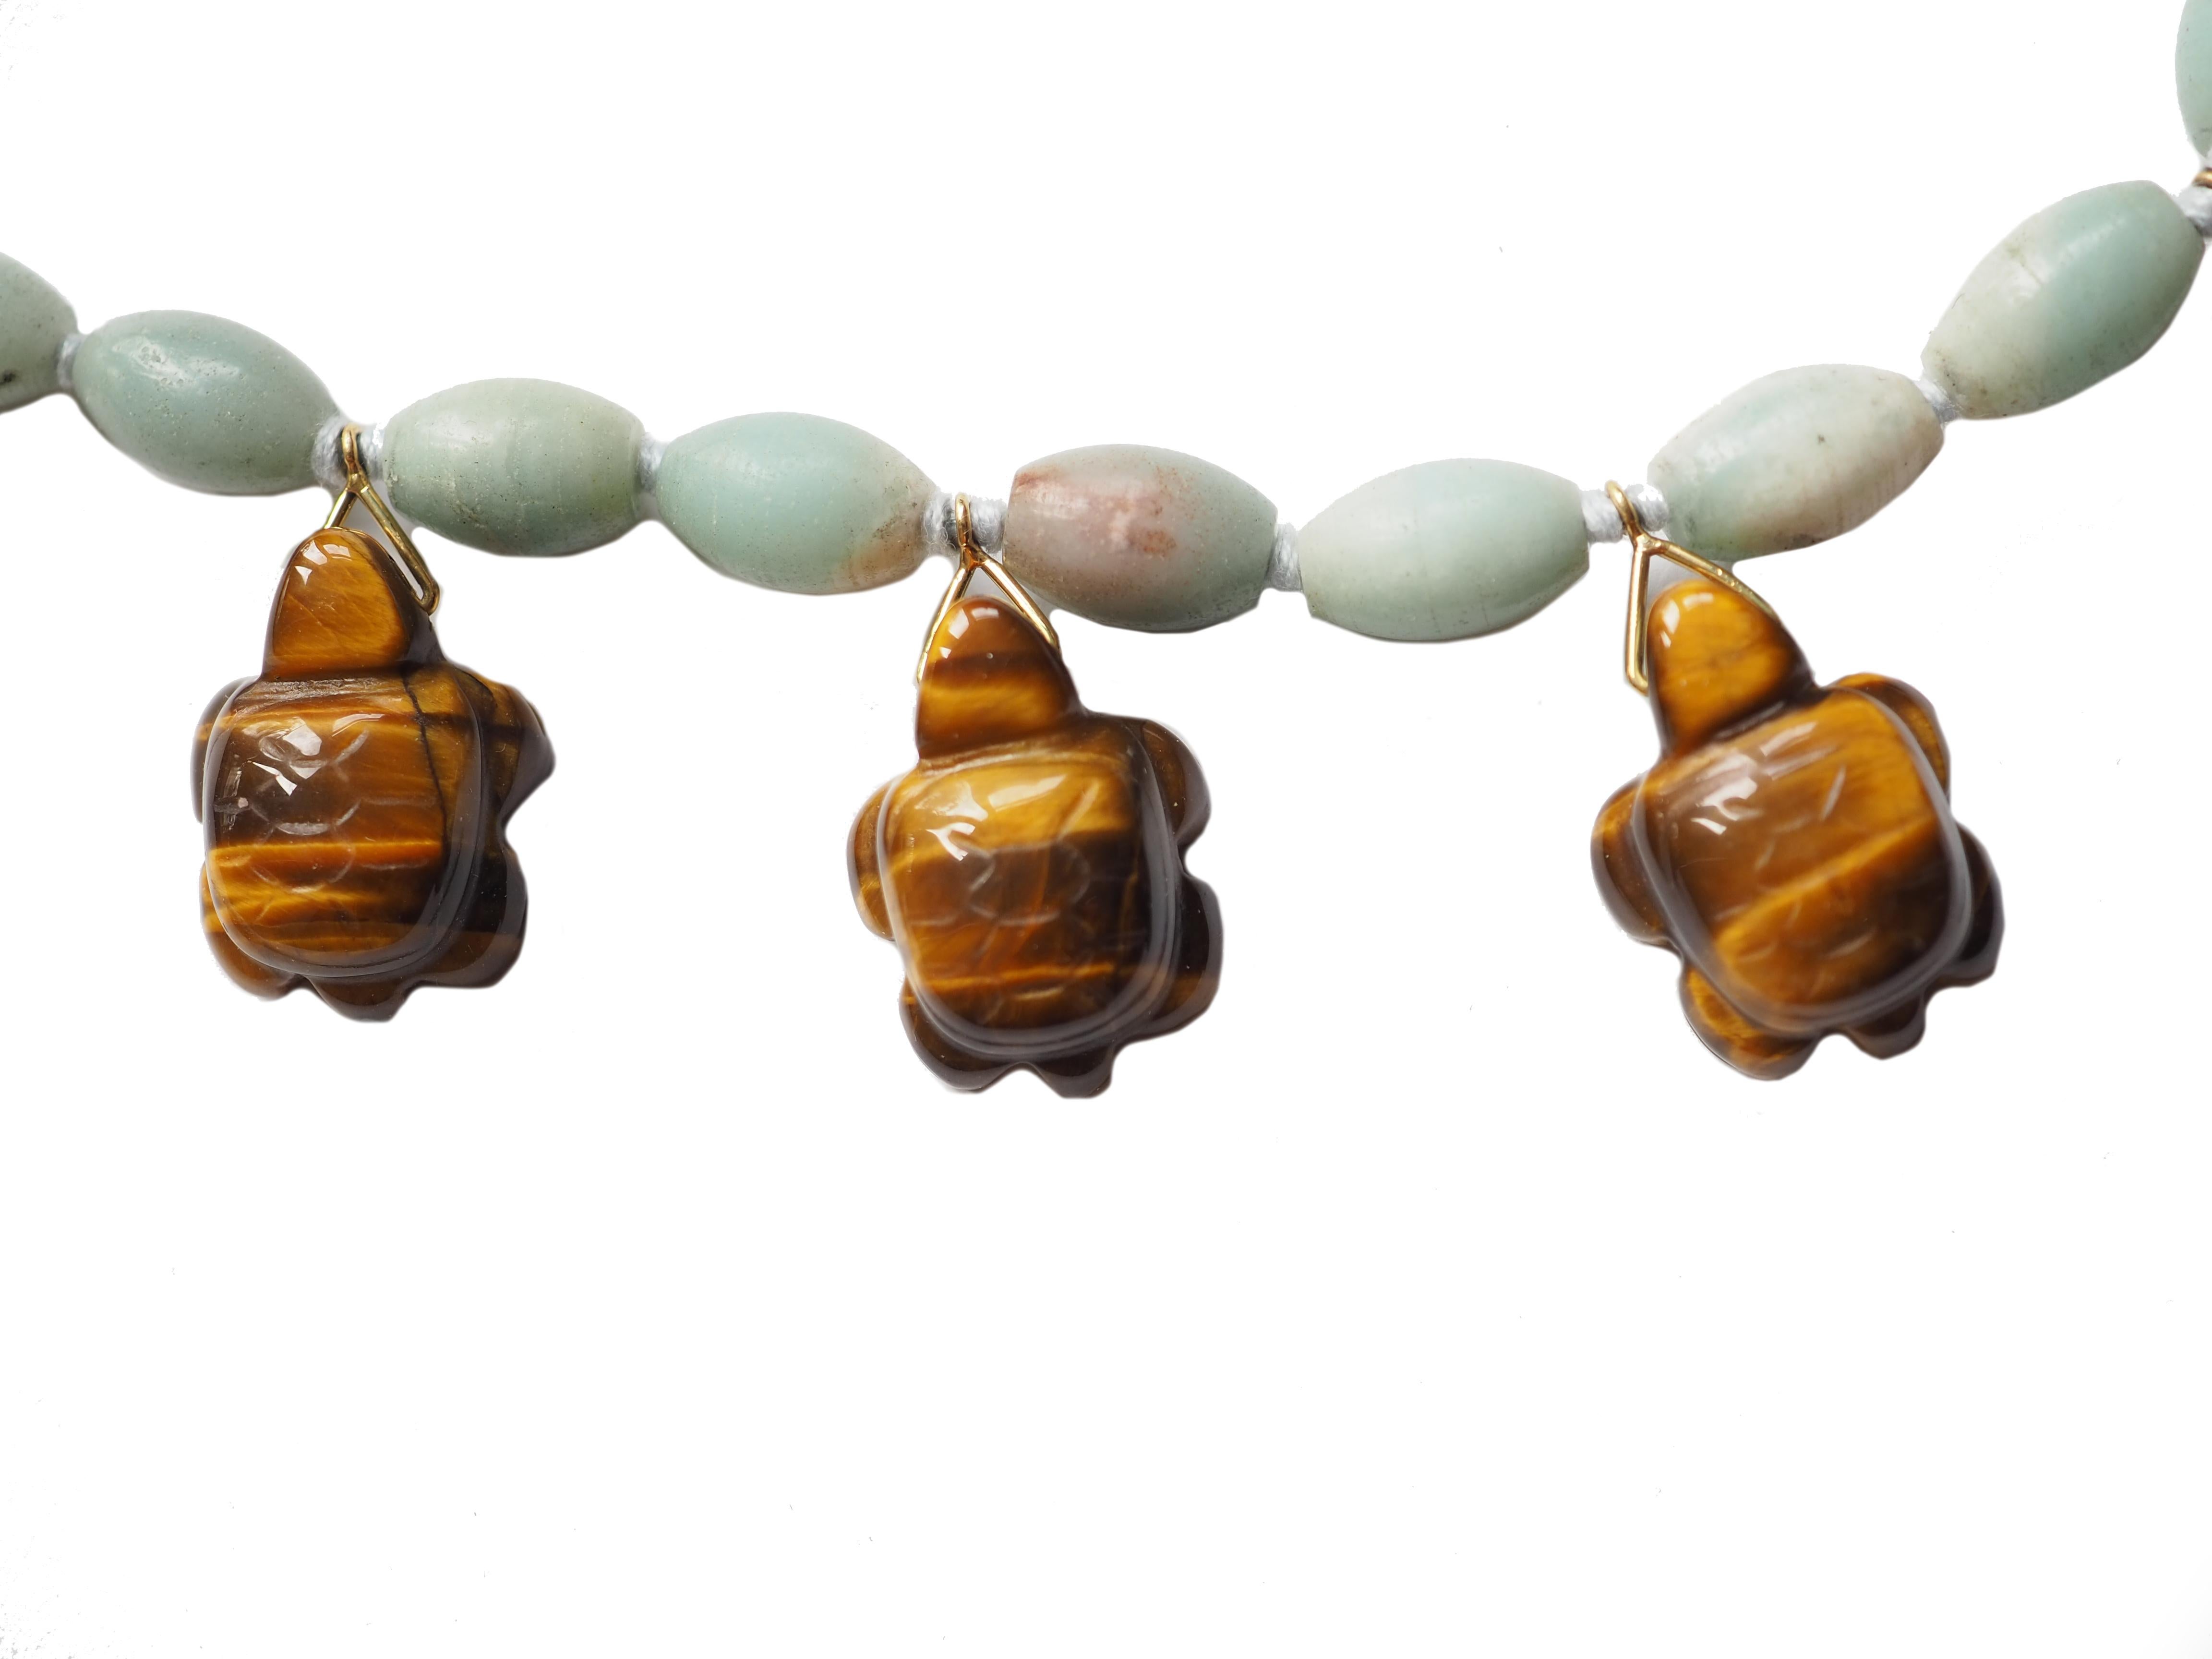 Amazzonite tiger's eye carved turtle Necklace 18 kt Gold gr 3,40 length 48 cm.
All Giulia Colussi jewelry is new and has never been previously owned or worn. Each item will arrive at your door beautifully gift wrapped in our boxes, put inside an